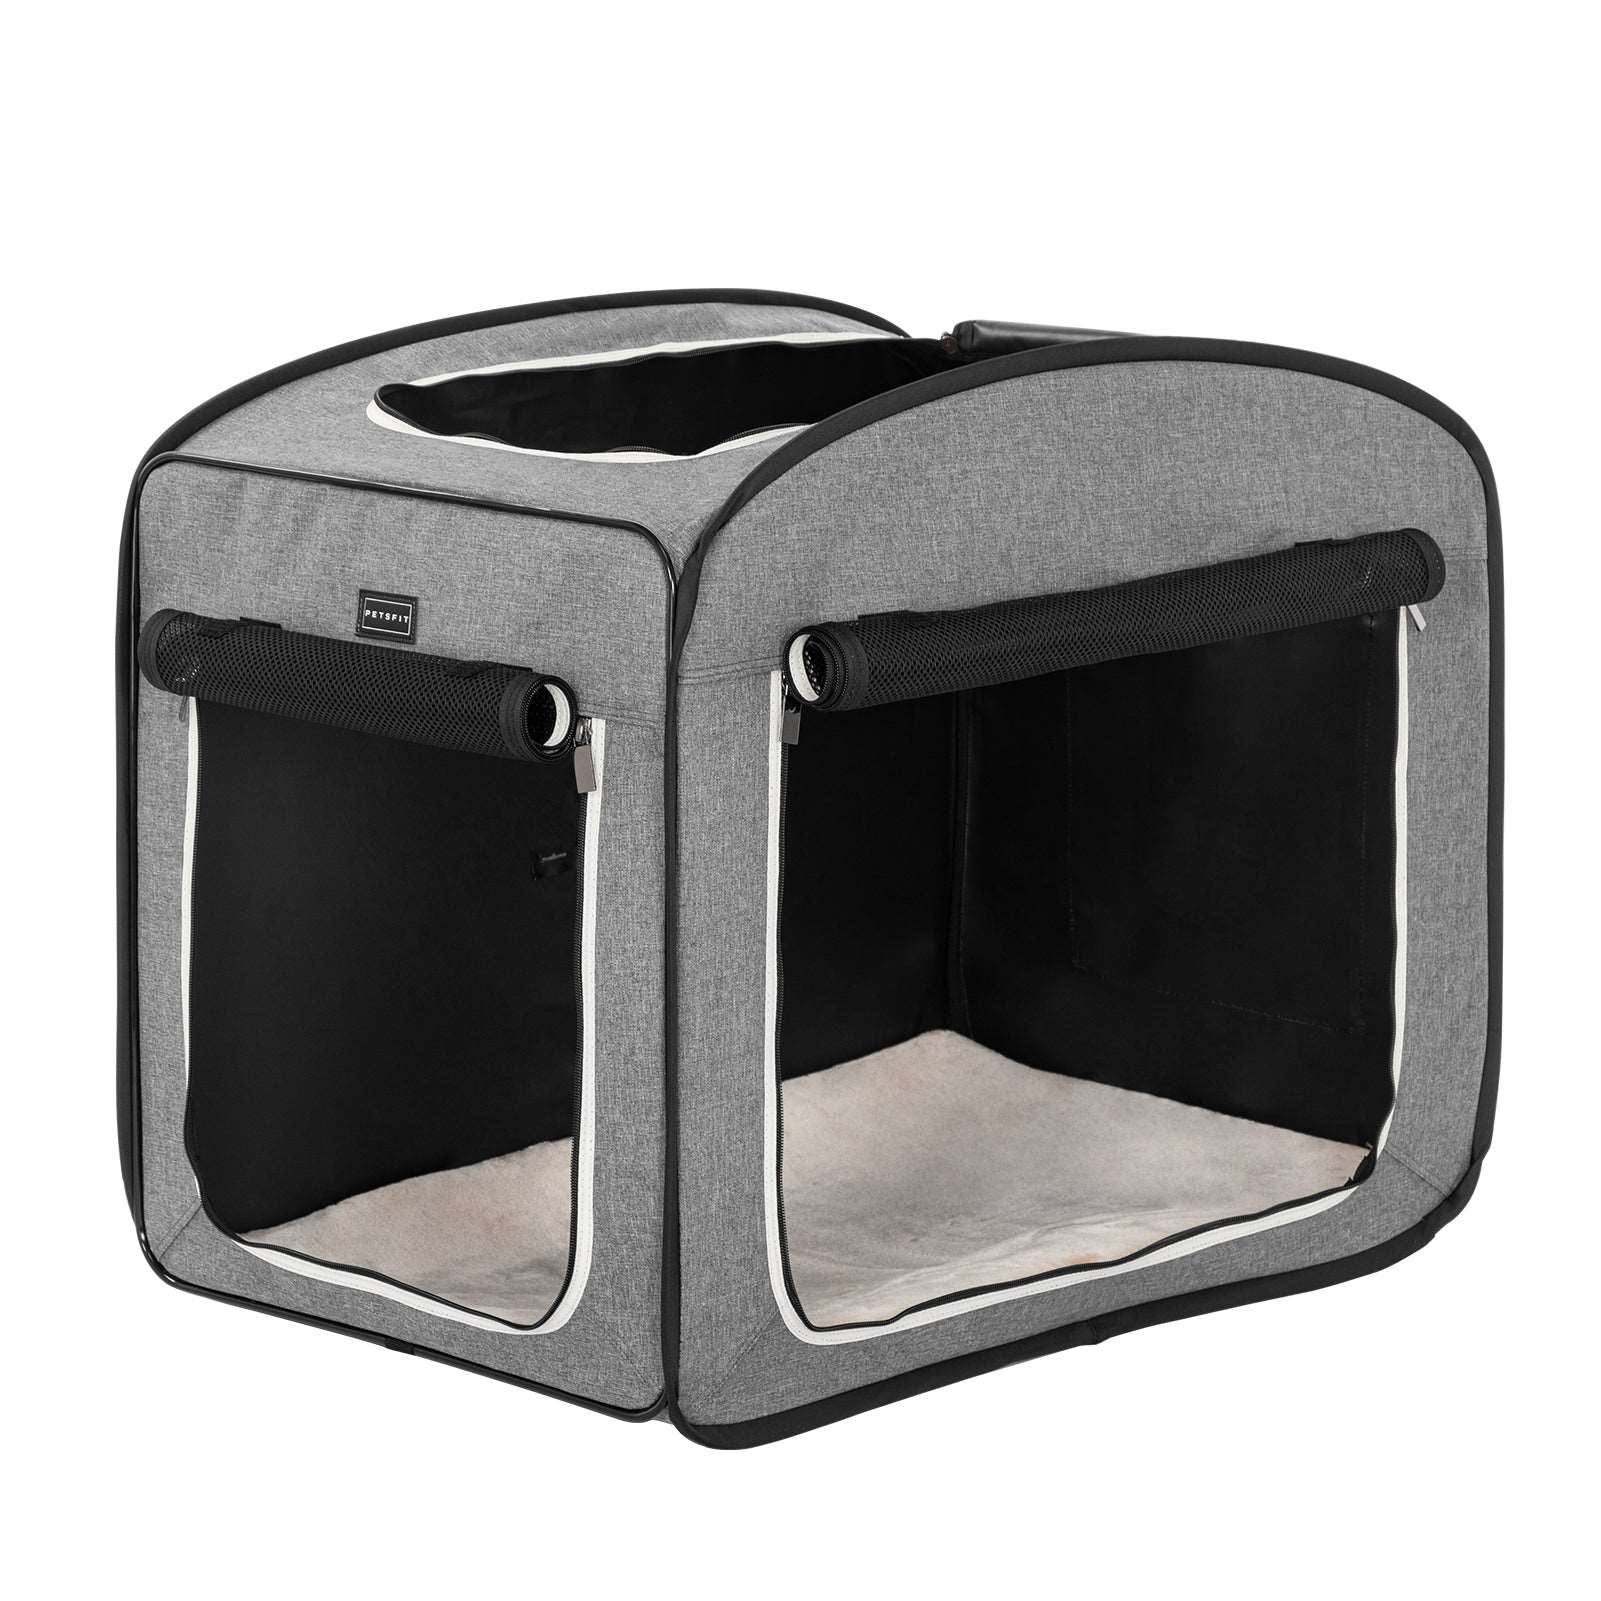 Petsfit-Collapsible-Dog-Crate-for-Travel-01